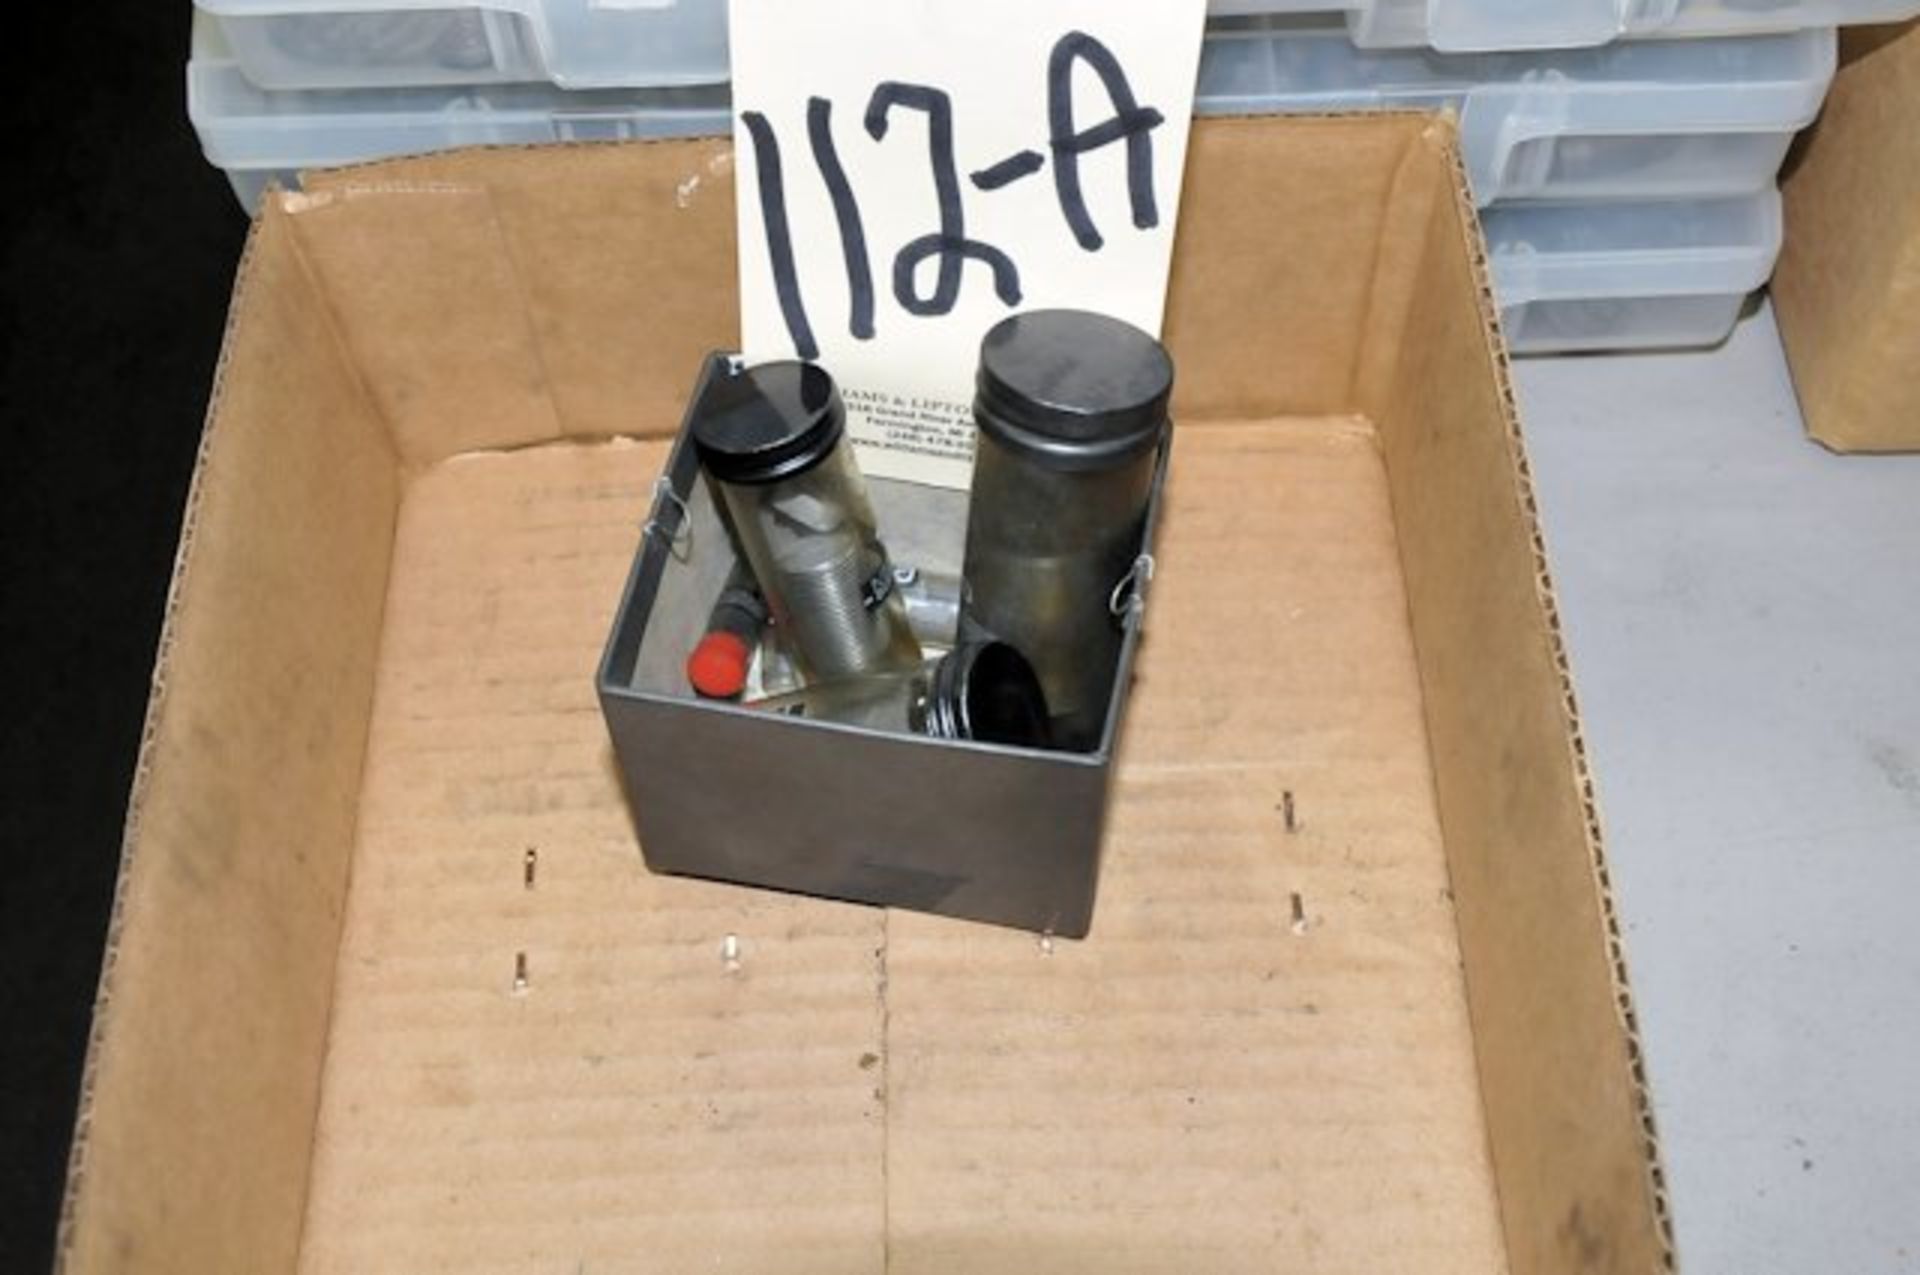 Lot-Microbores (USED) in (1) Box